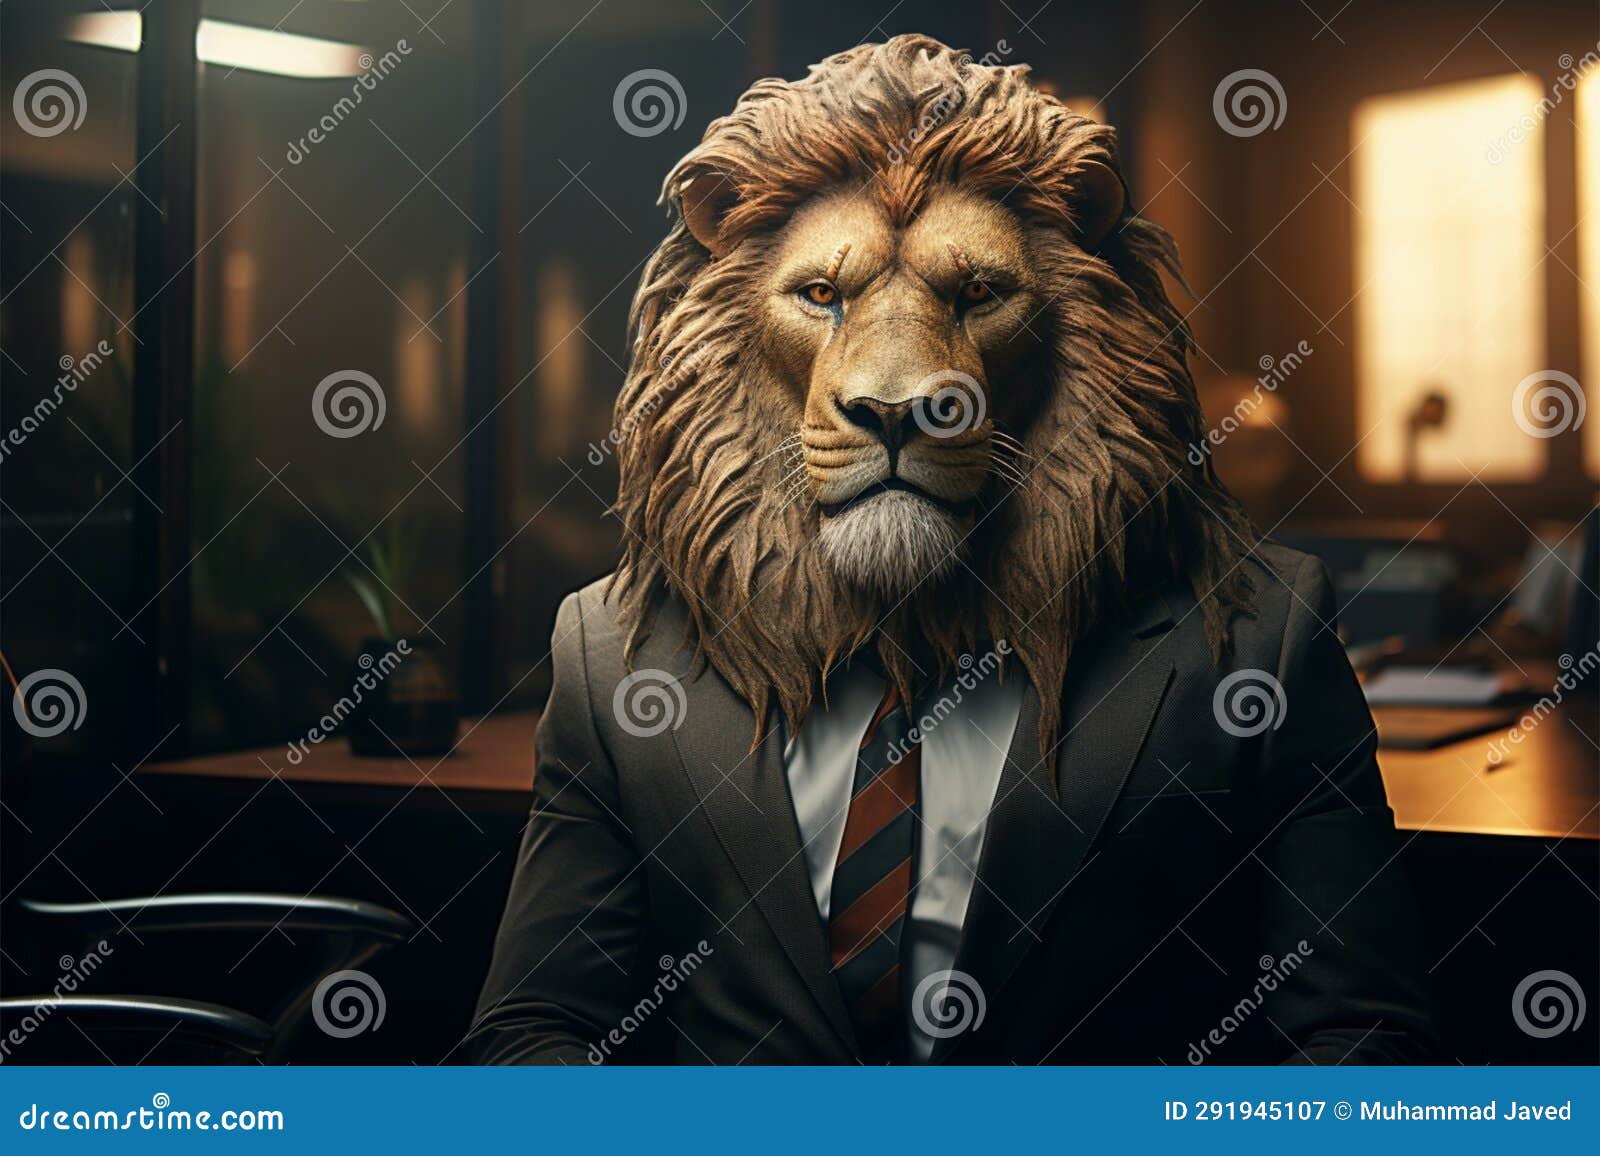 a corporate executive, with a lions head, presides over the office